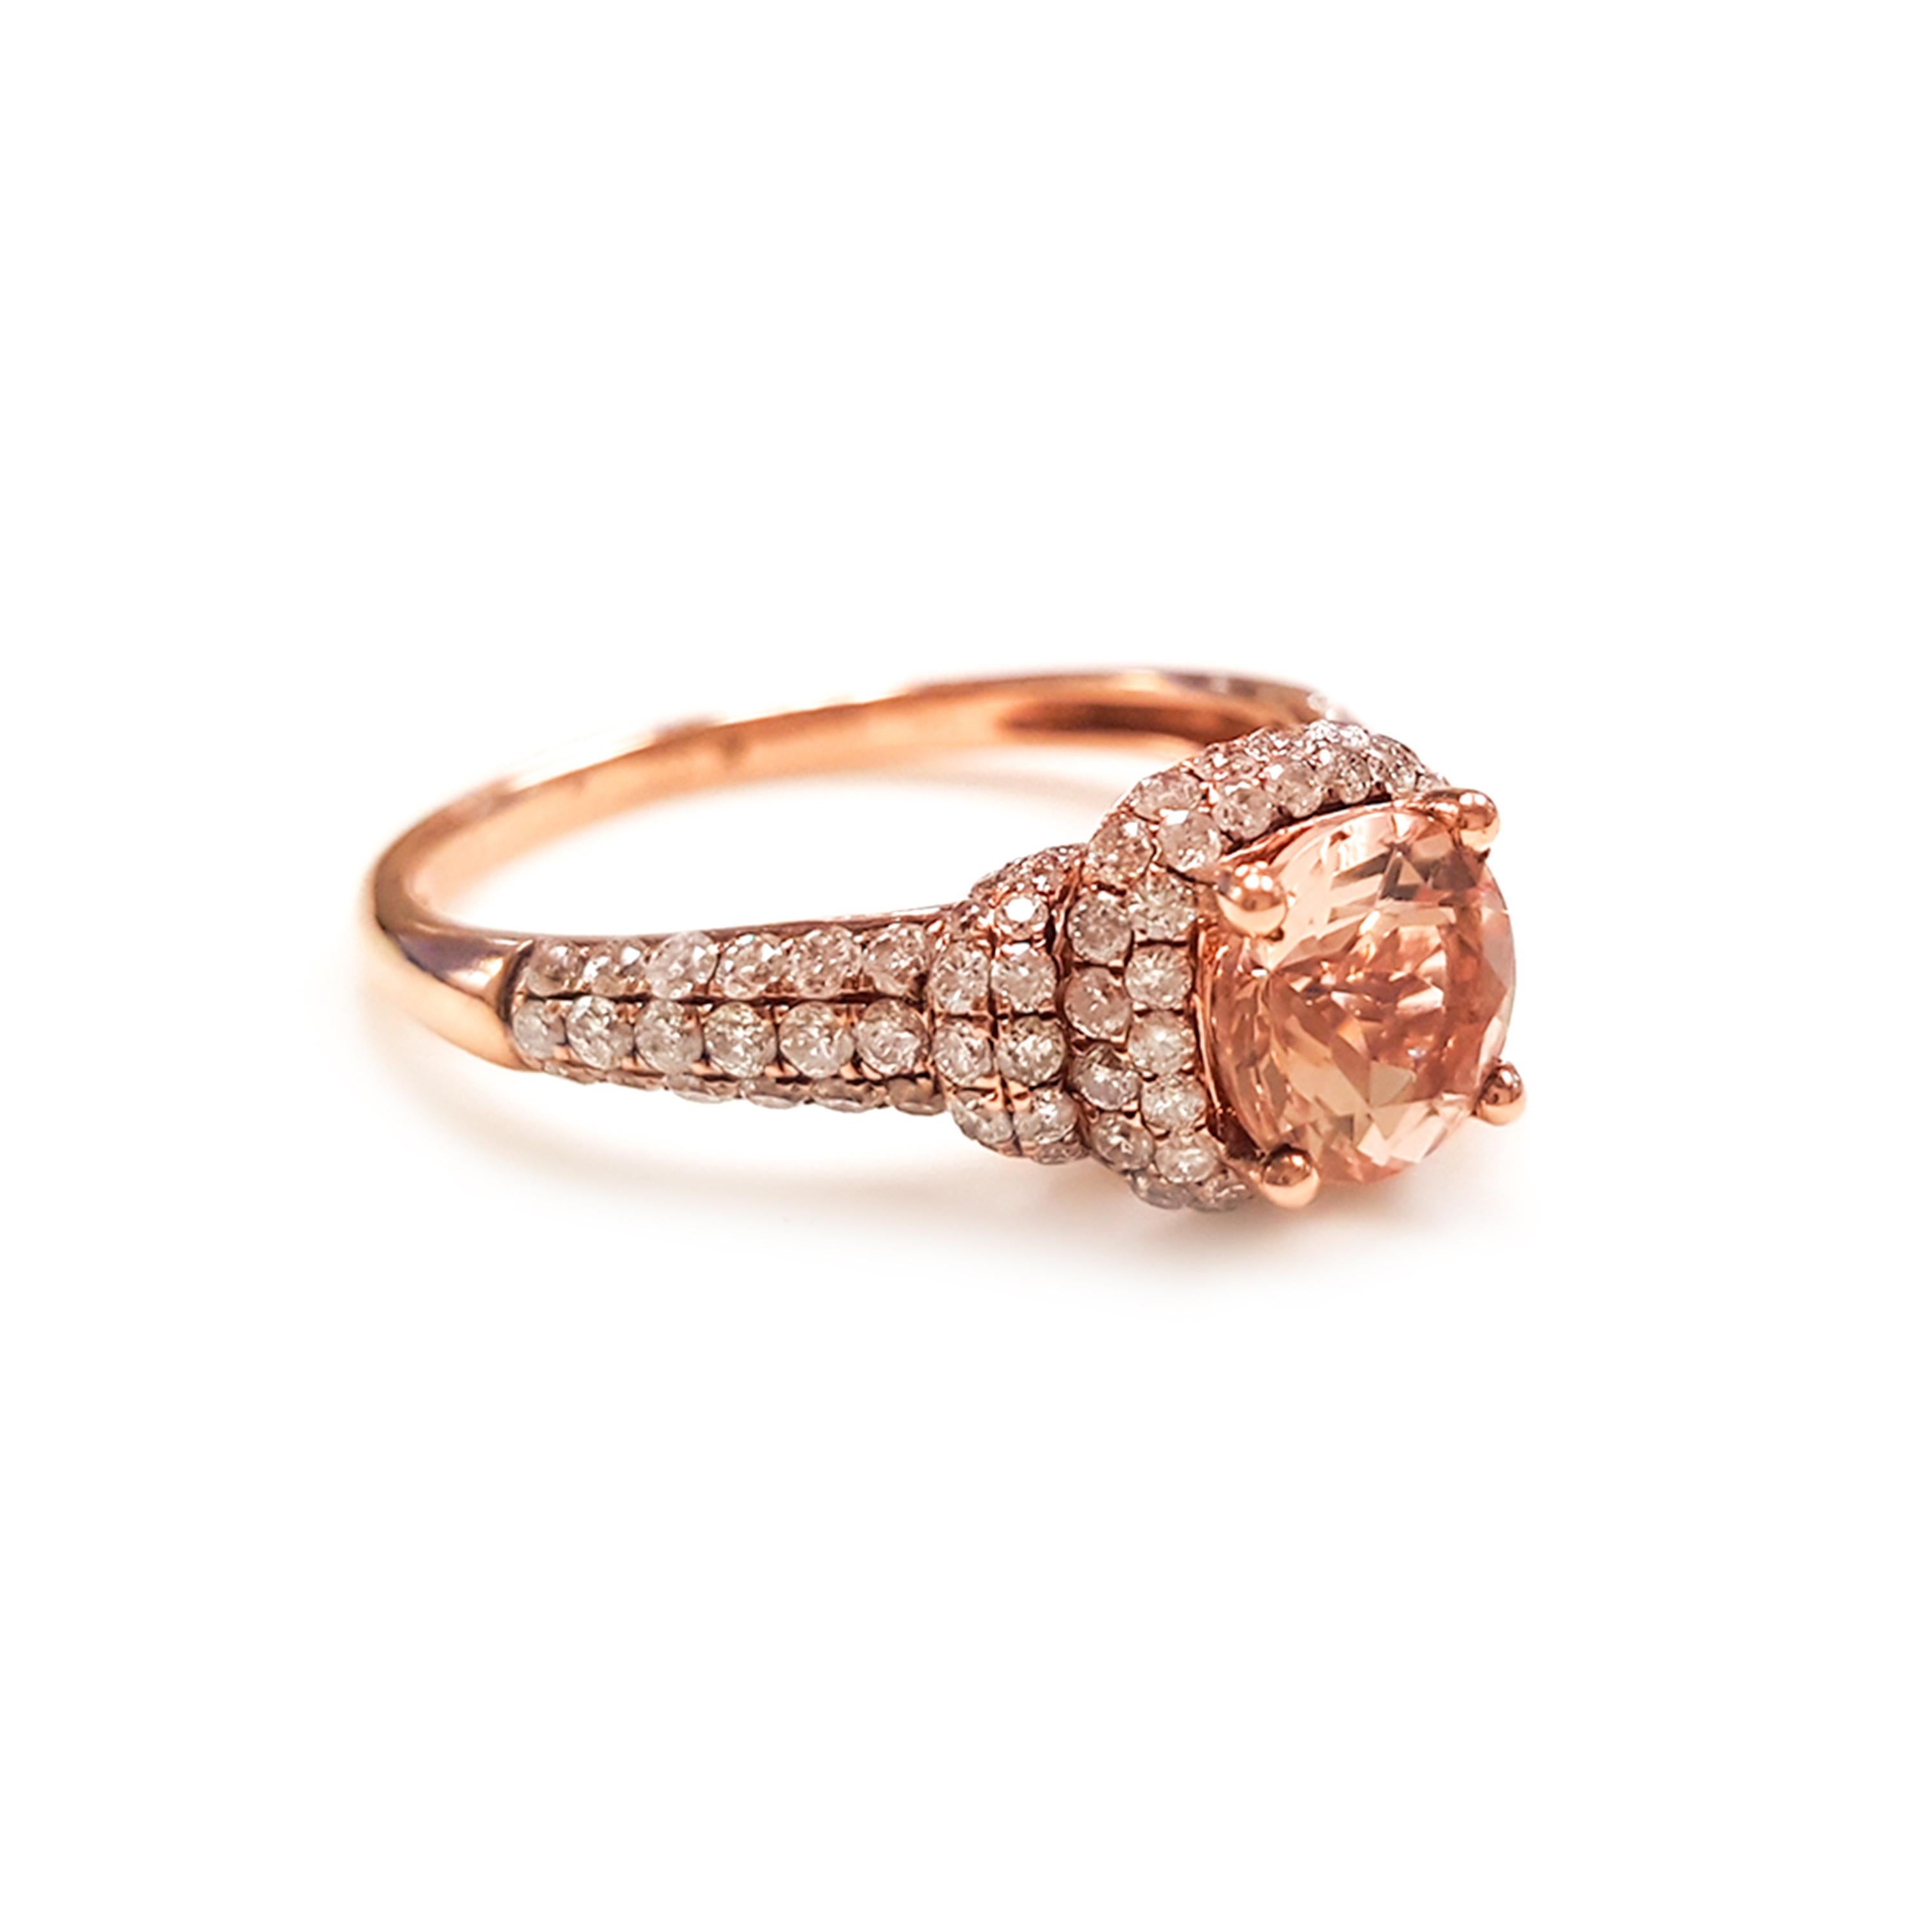 This Ladies 14k Rose Gold Morganite and Diamonds Ring has 0.94 carats of Morganite and 0.83 carats of Diamonds. Comfort fit ring for everyday use. Ring size 7
